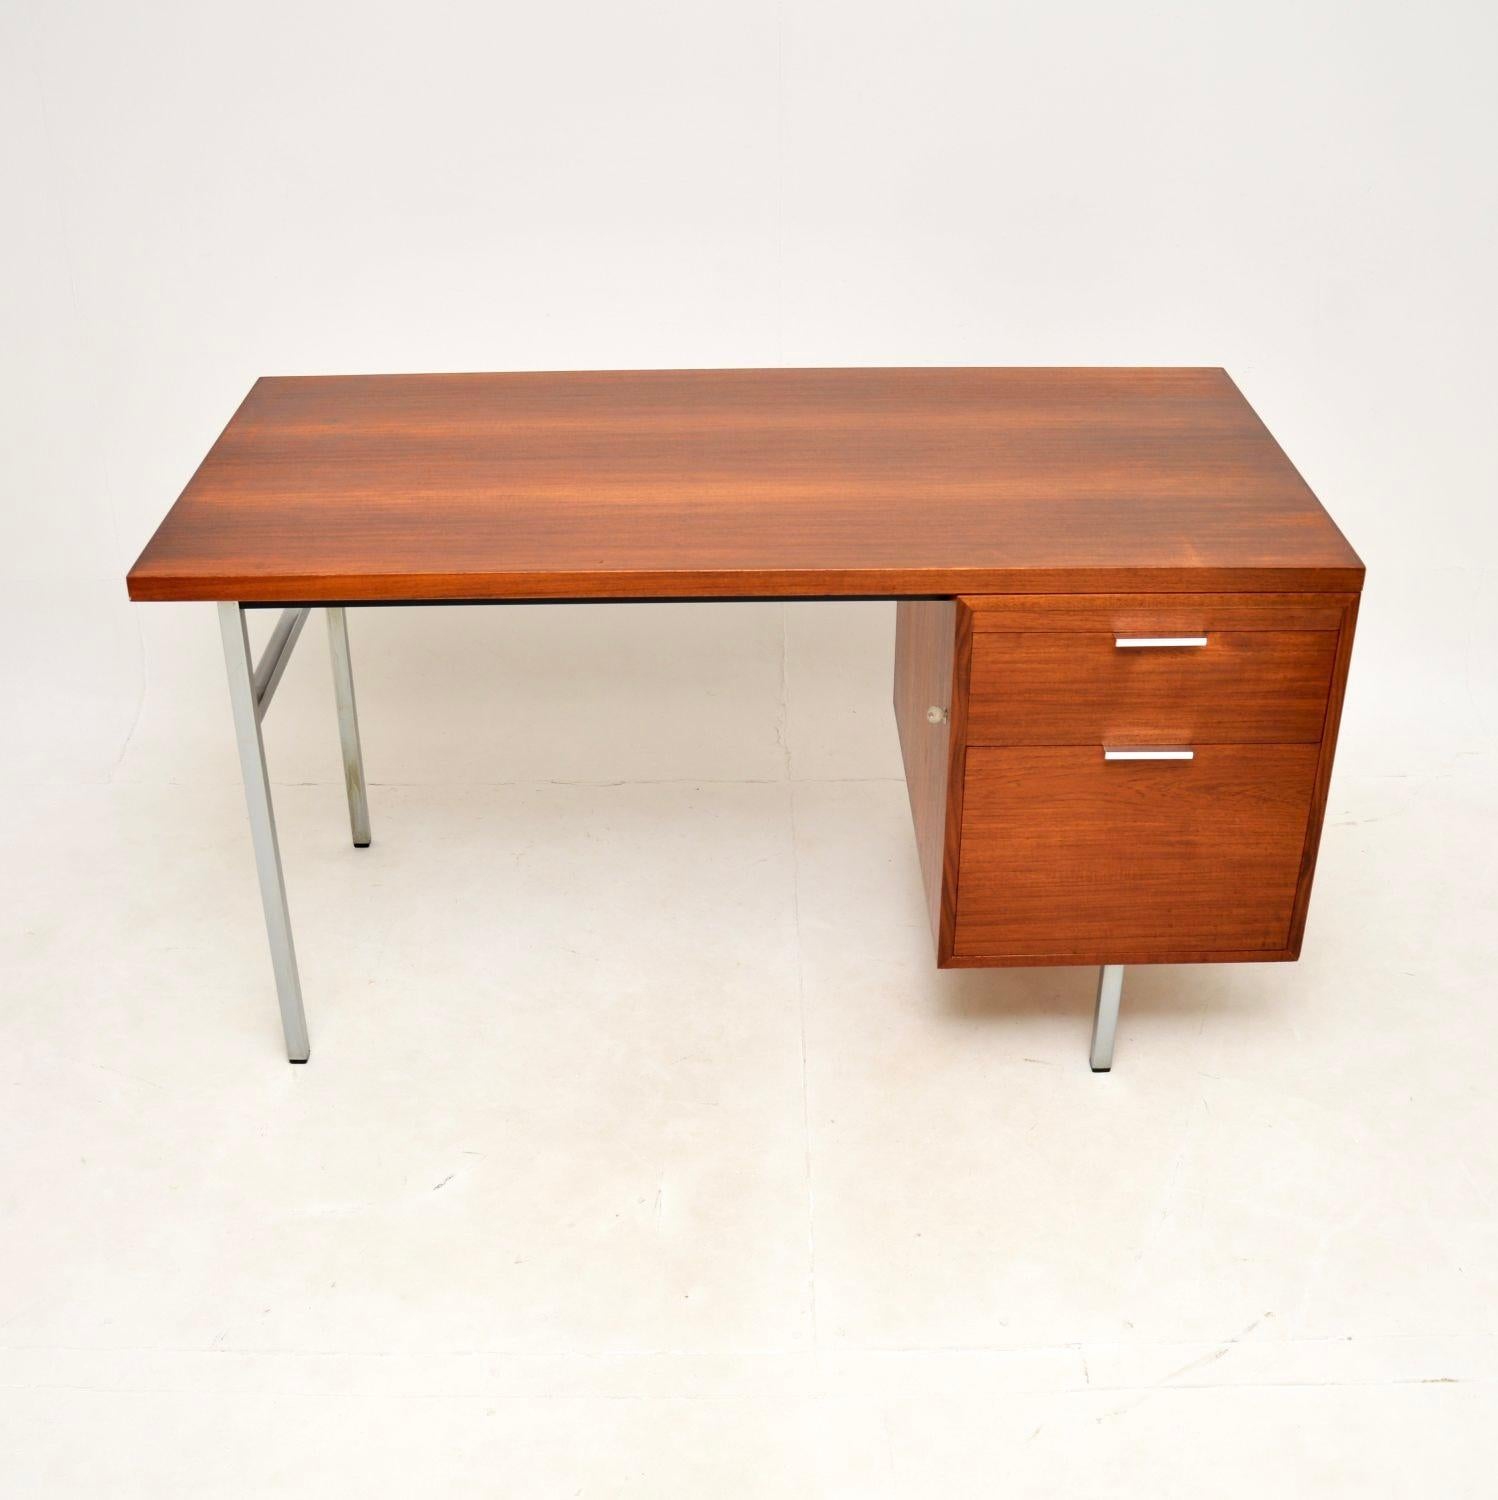 A stylish and extremely well made vintage teak and steel desk by Robin Day for Hille. This was part of the ‘Status’ range, designed in 1959 and made in England. This model dates from the 1960’s.

The quality is outstanding, with solid teak